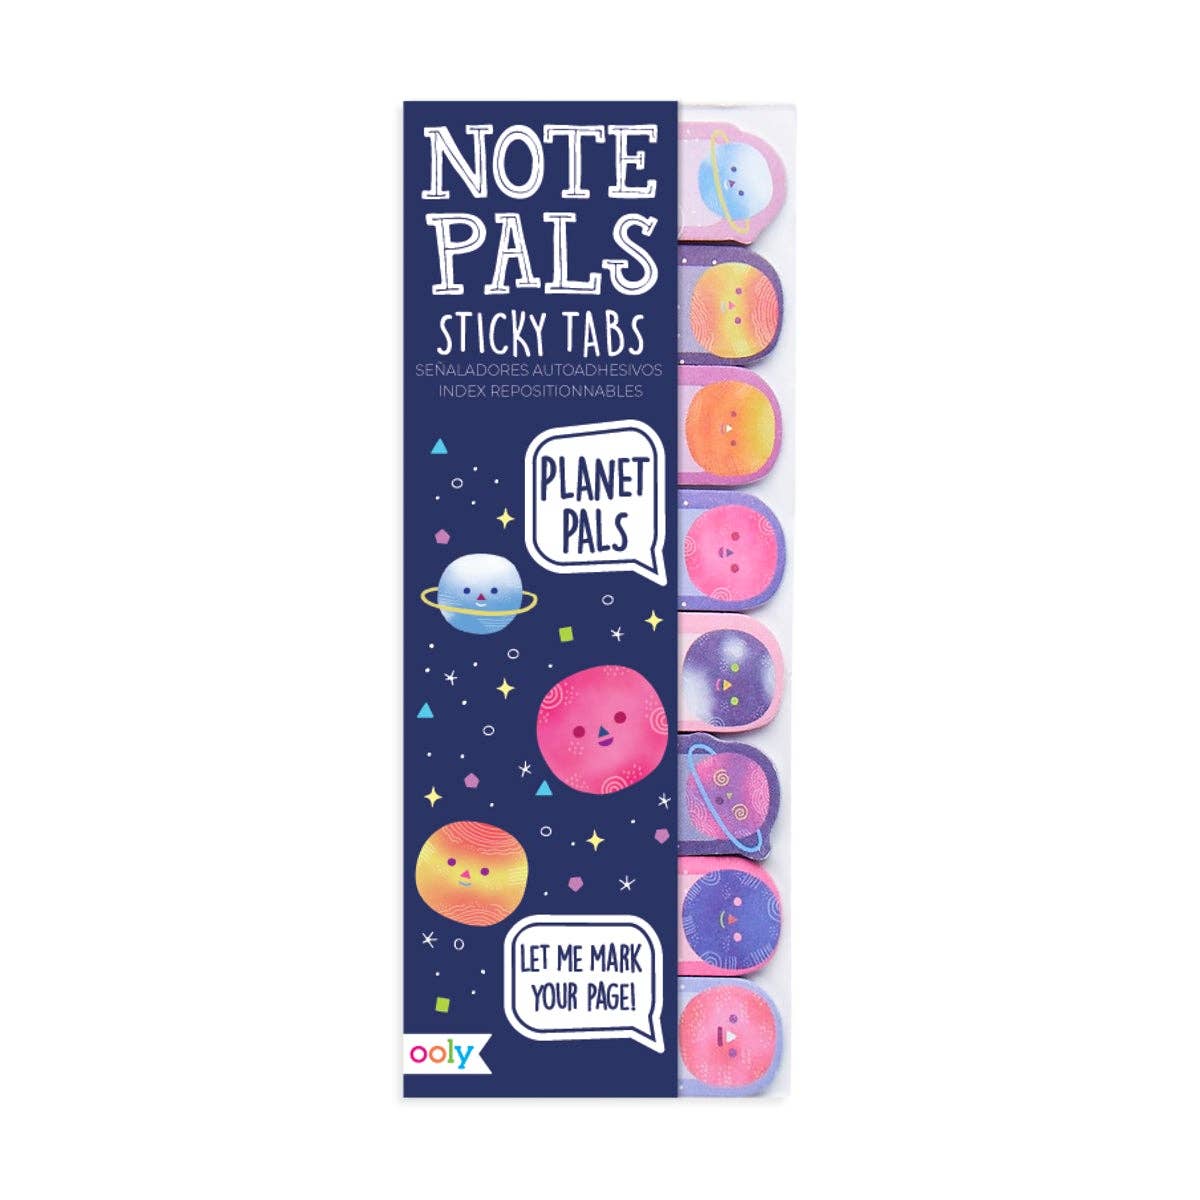 Note Pals Sticky Tabs - Planet Pals (1 Pack)